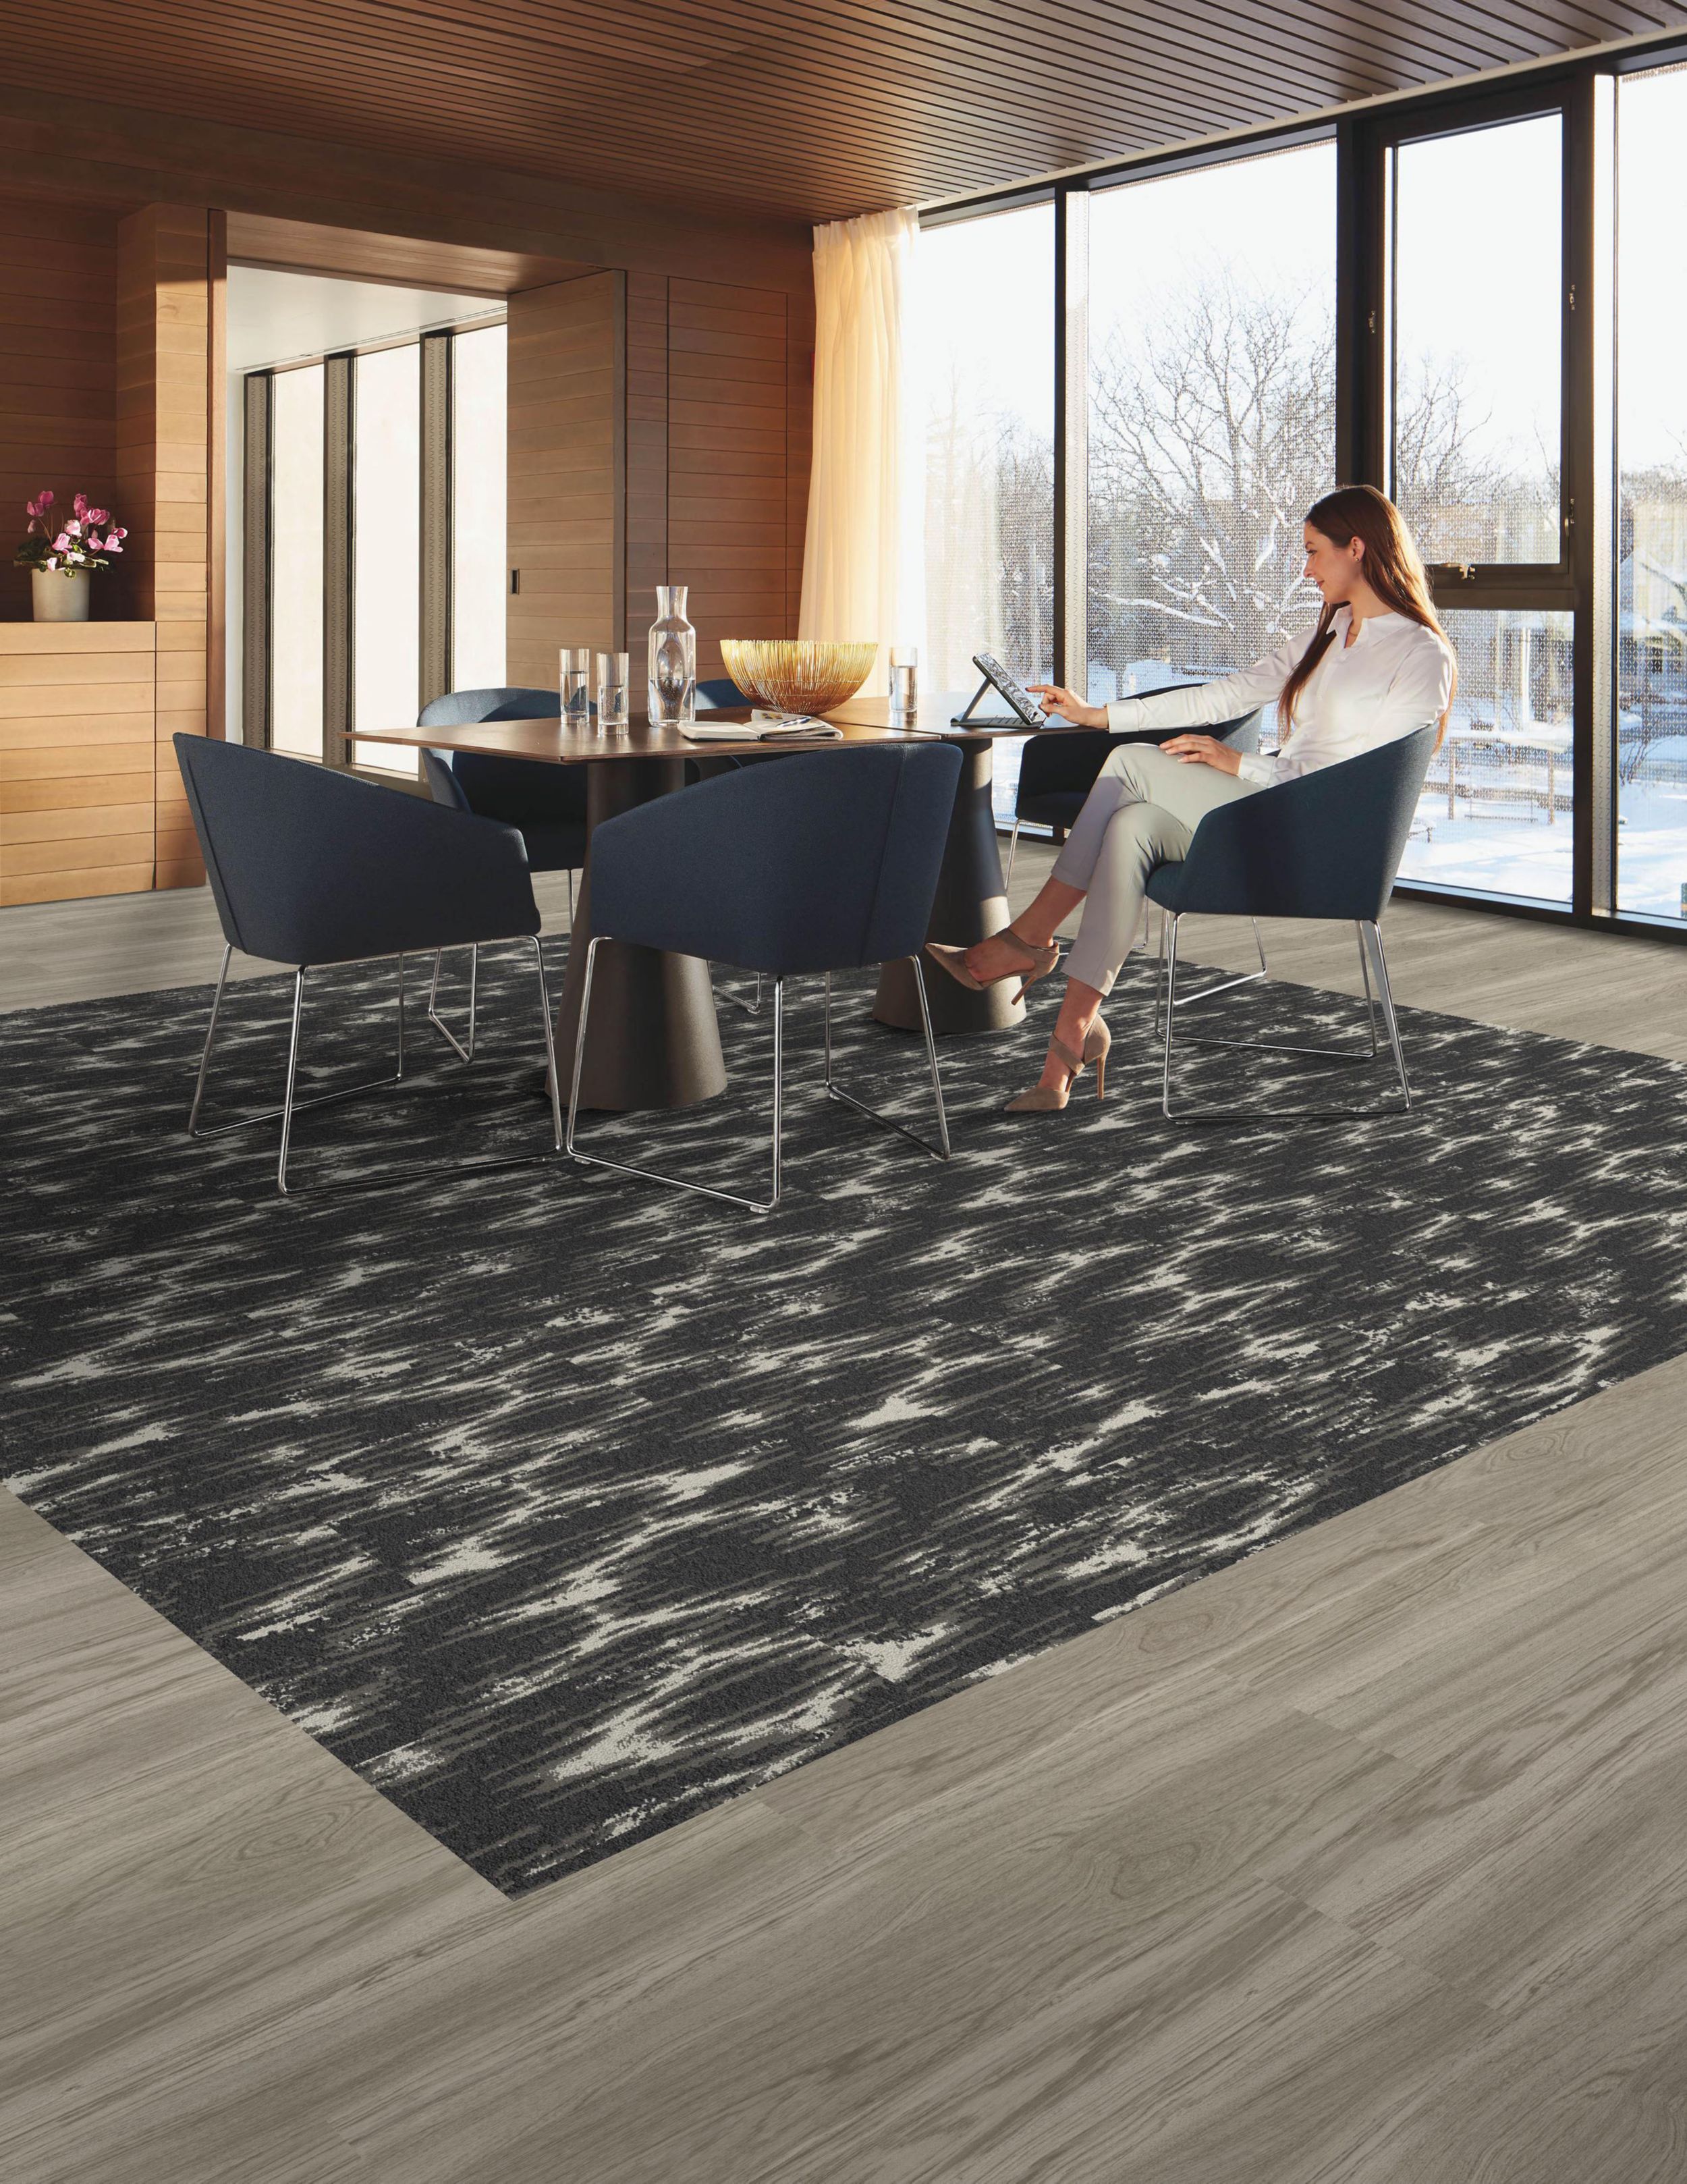 Interface Monoprint plank carpet tile inset as an area rug into Natural Woodgrains LVT in cafe area with glass walls and wood ceiling imagen número 2